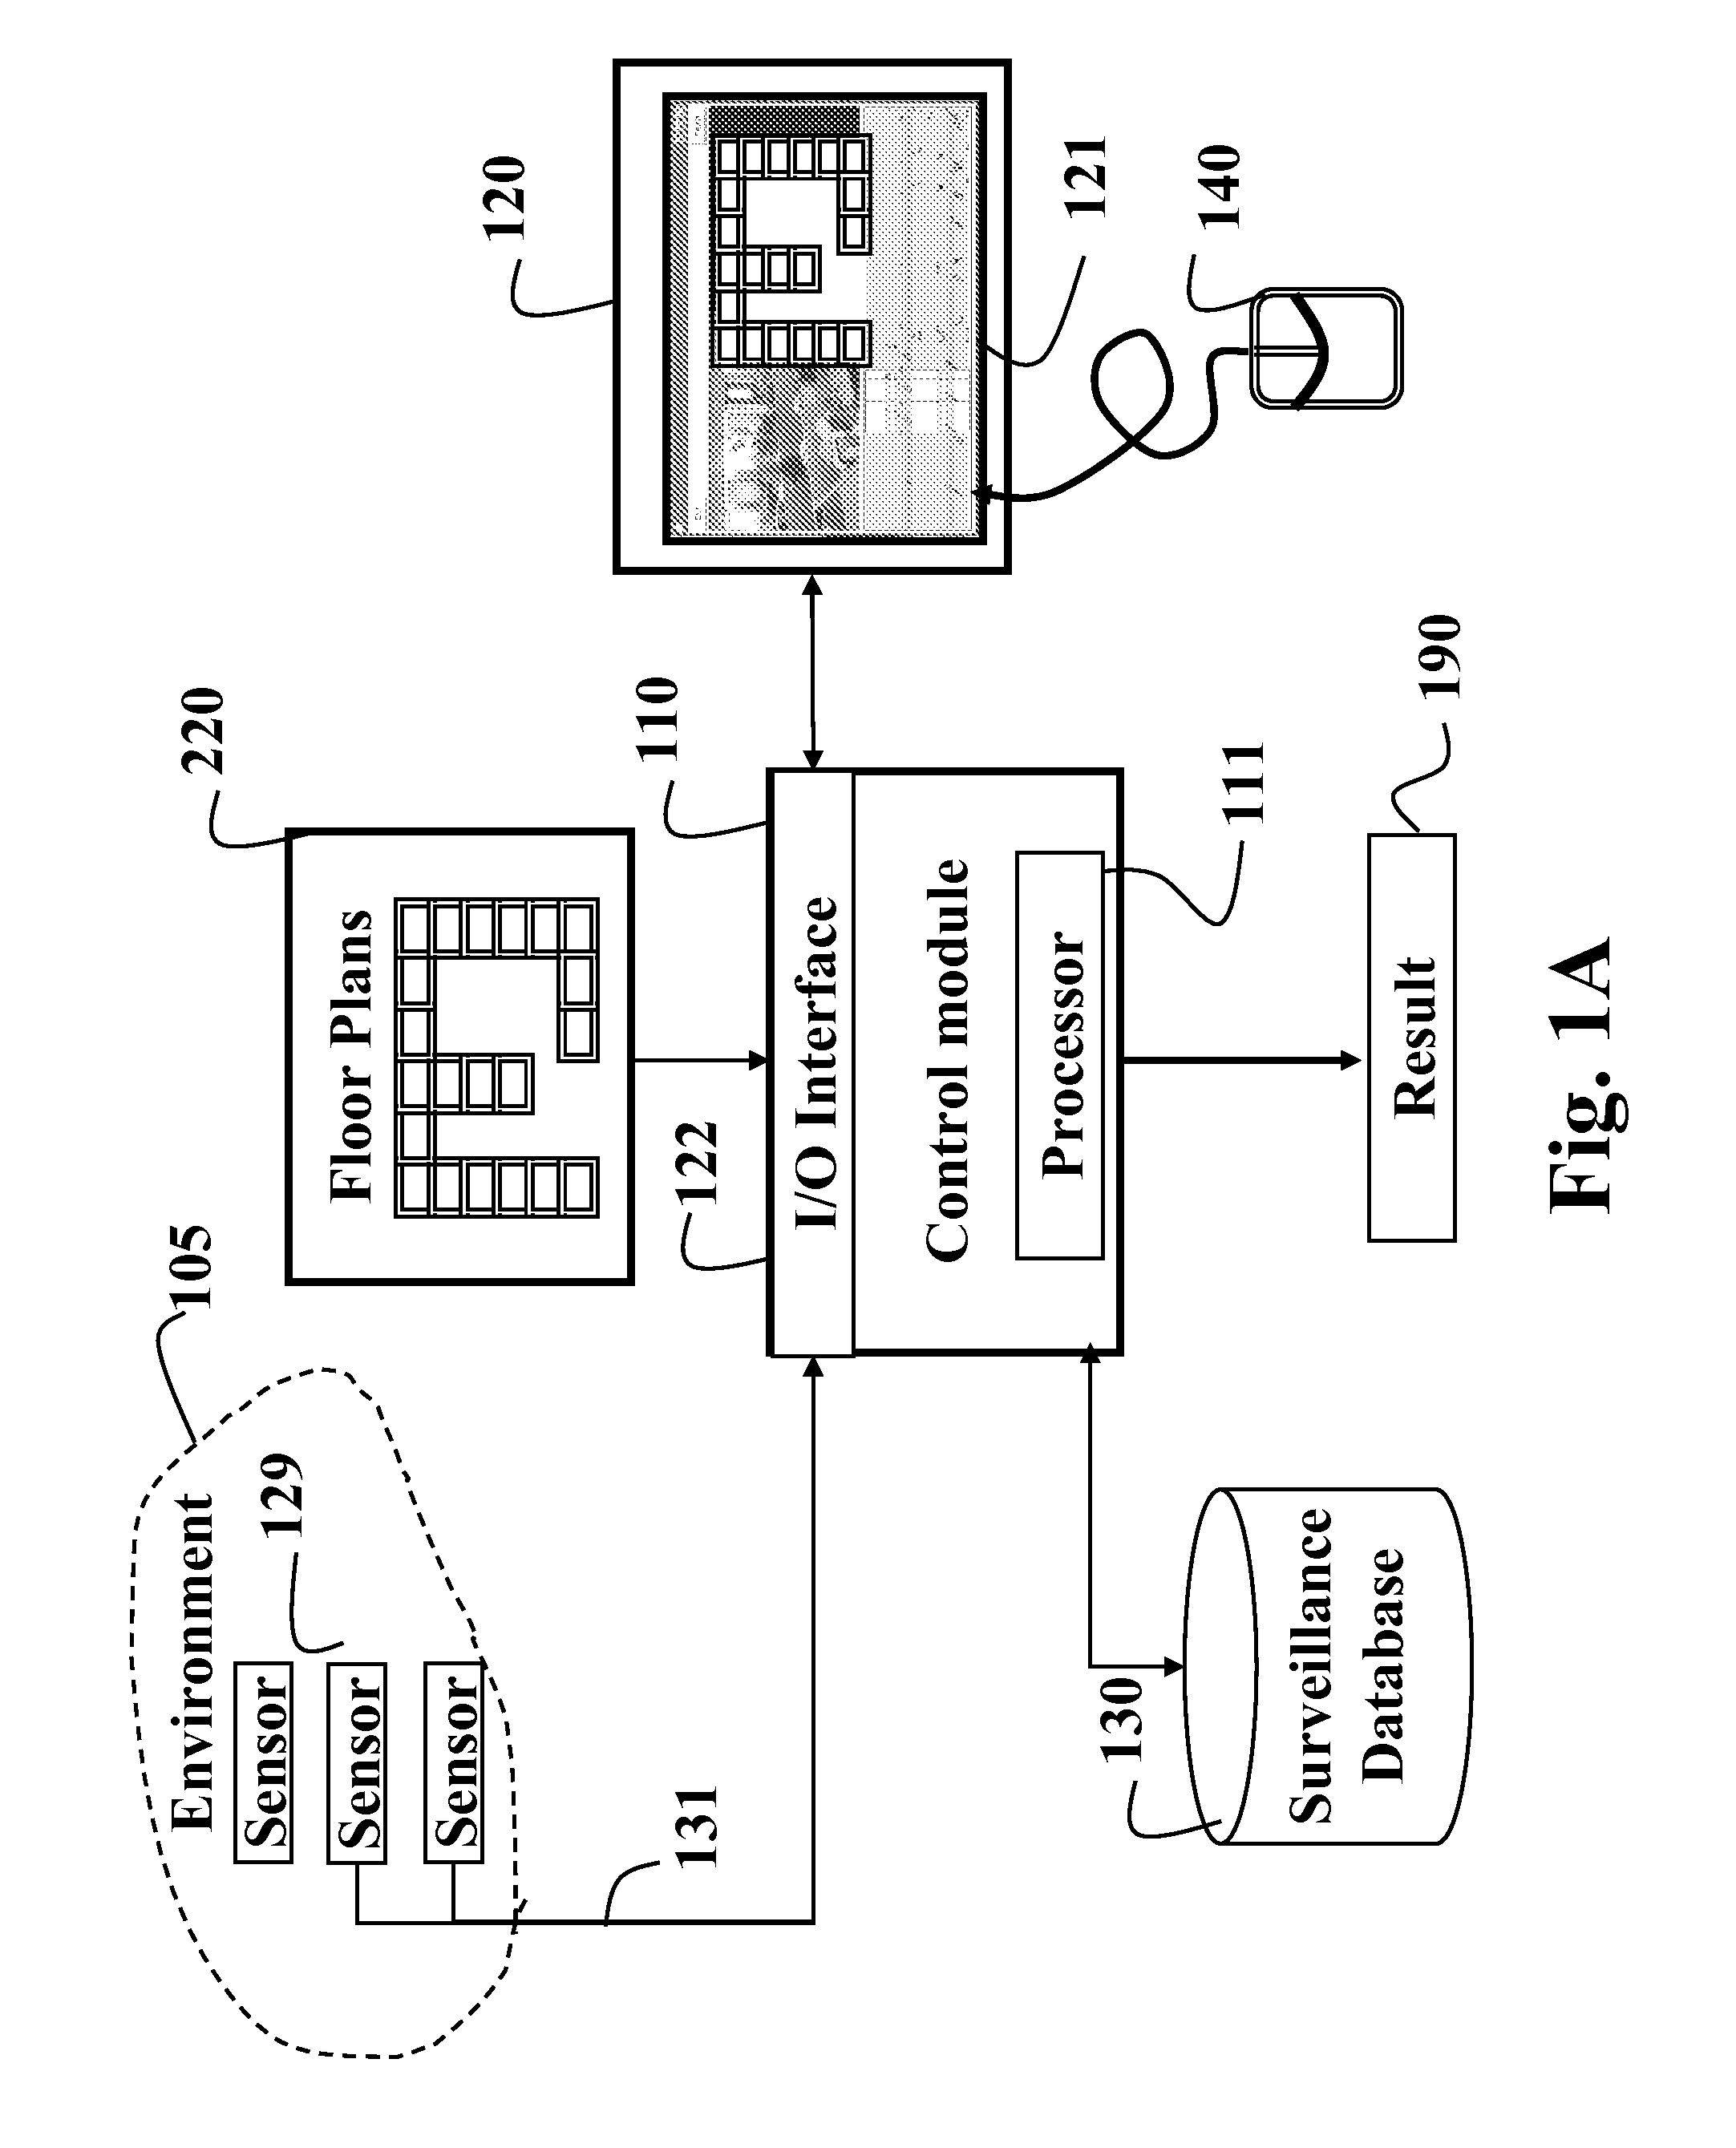 Method and System for Directing Cameras